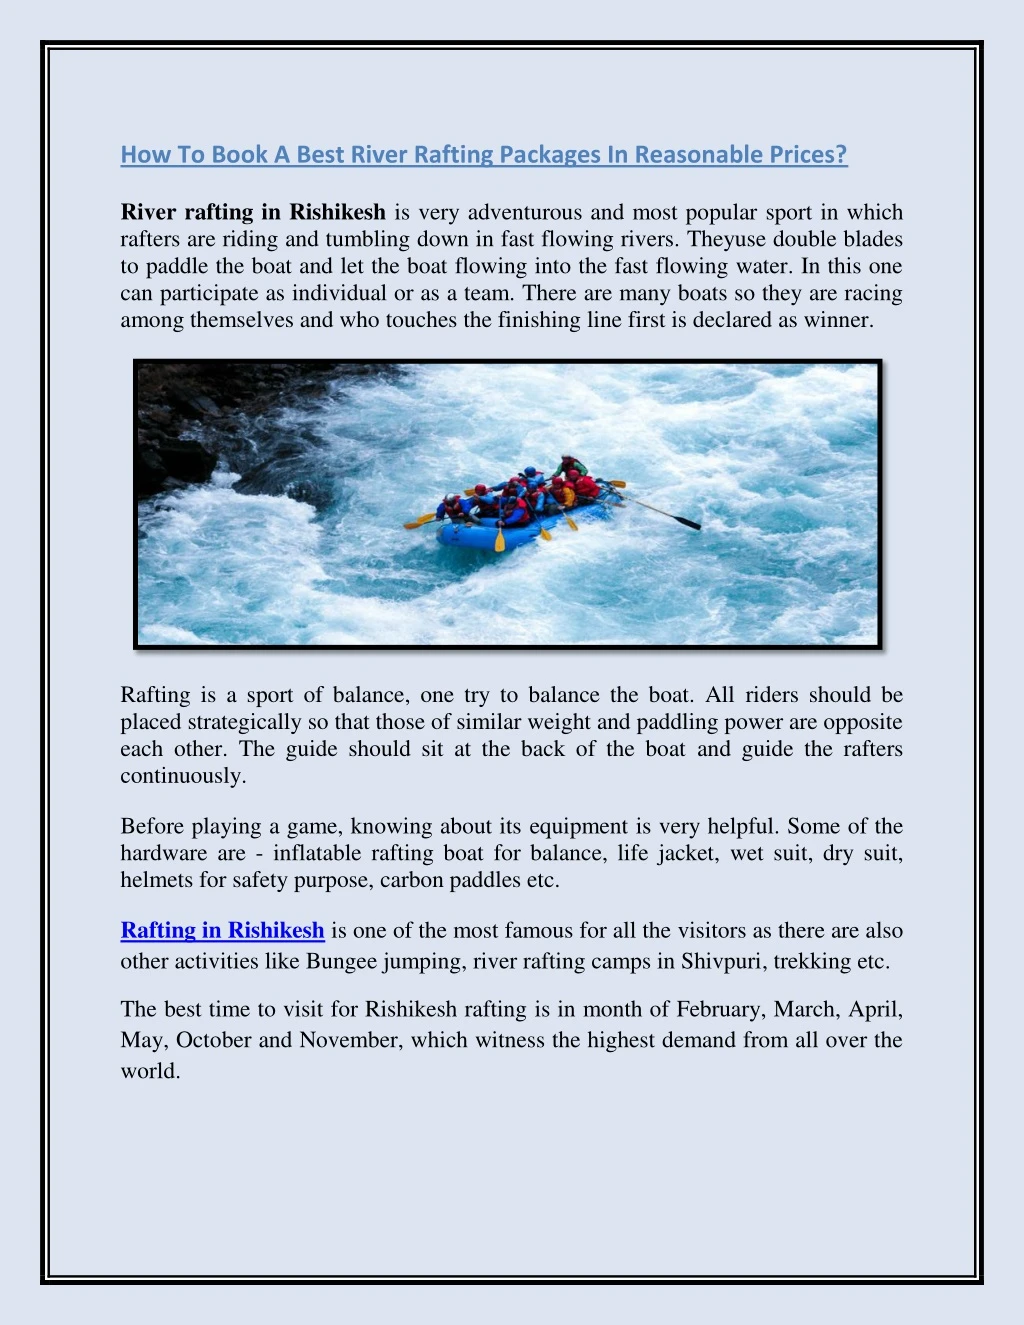 how to book a best river rafting packages